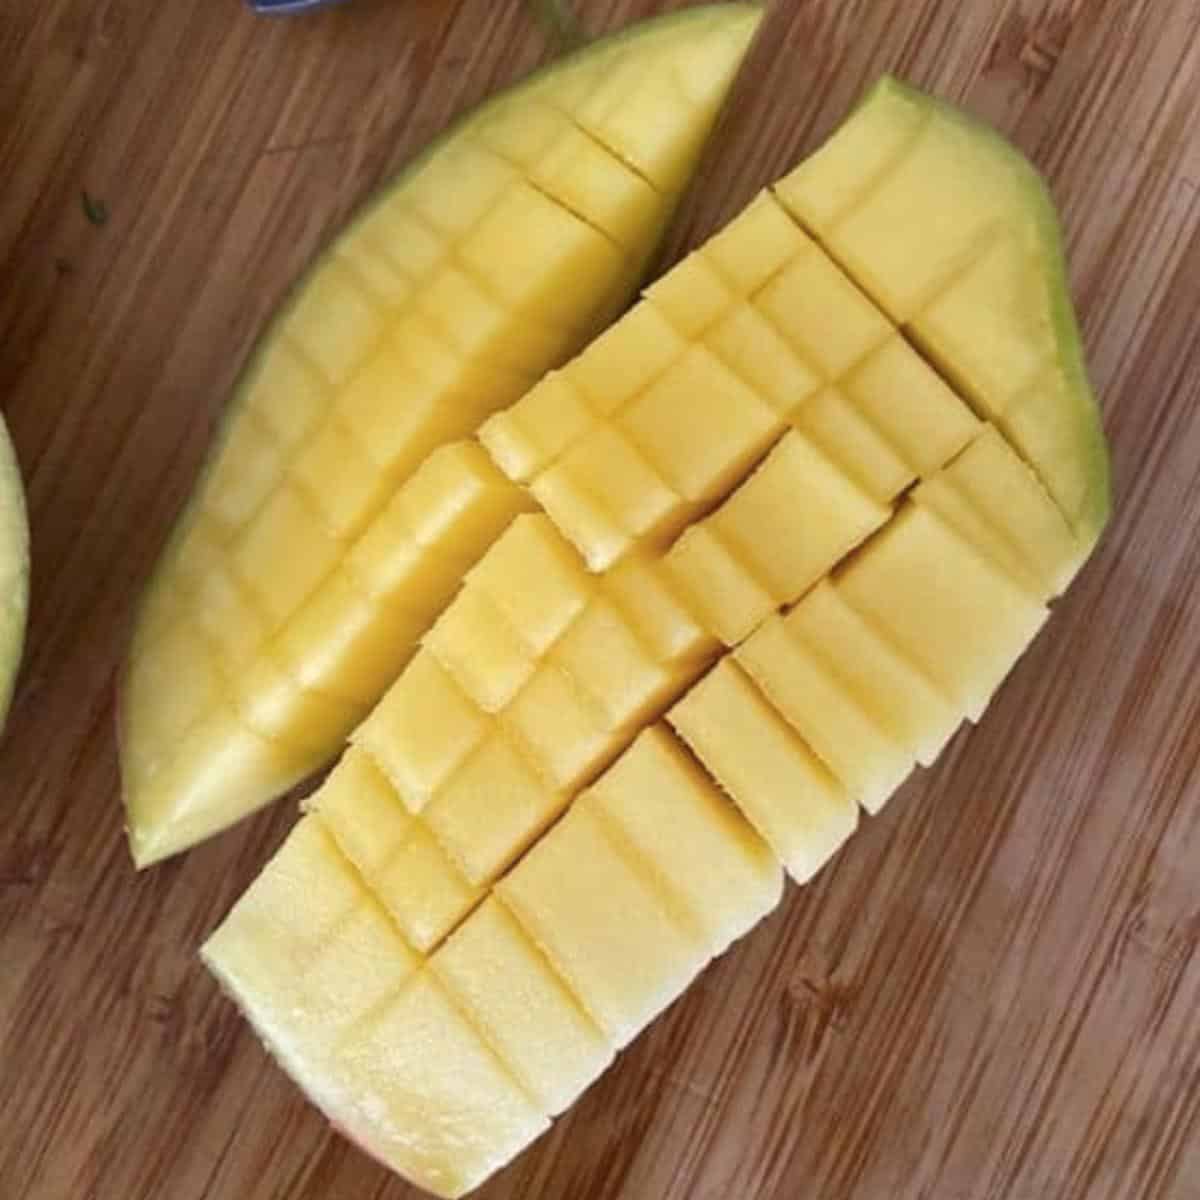 gridline cut mango ready for scooping